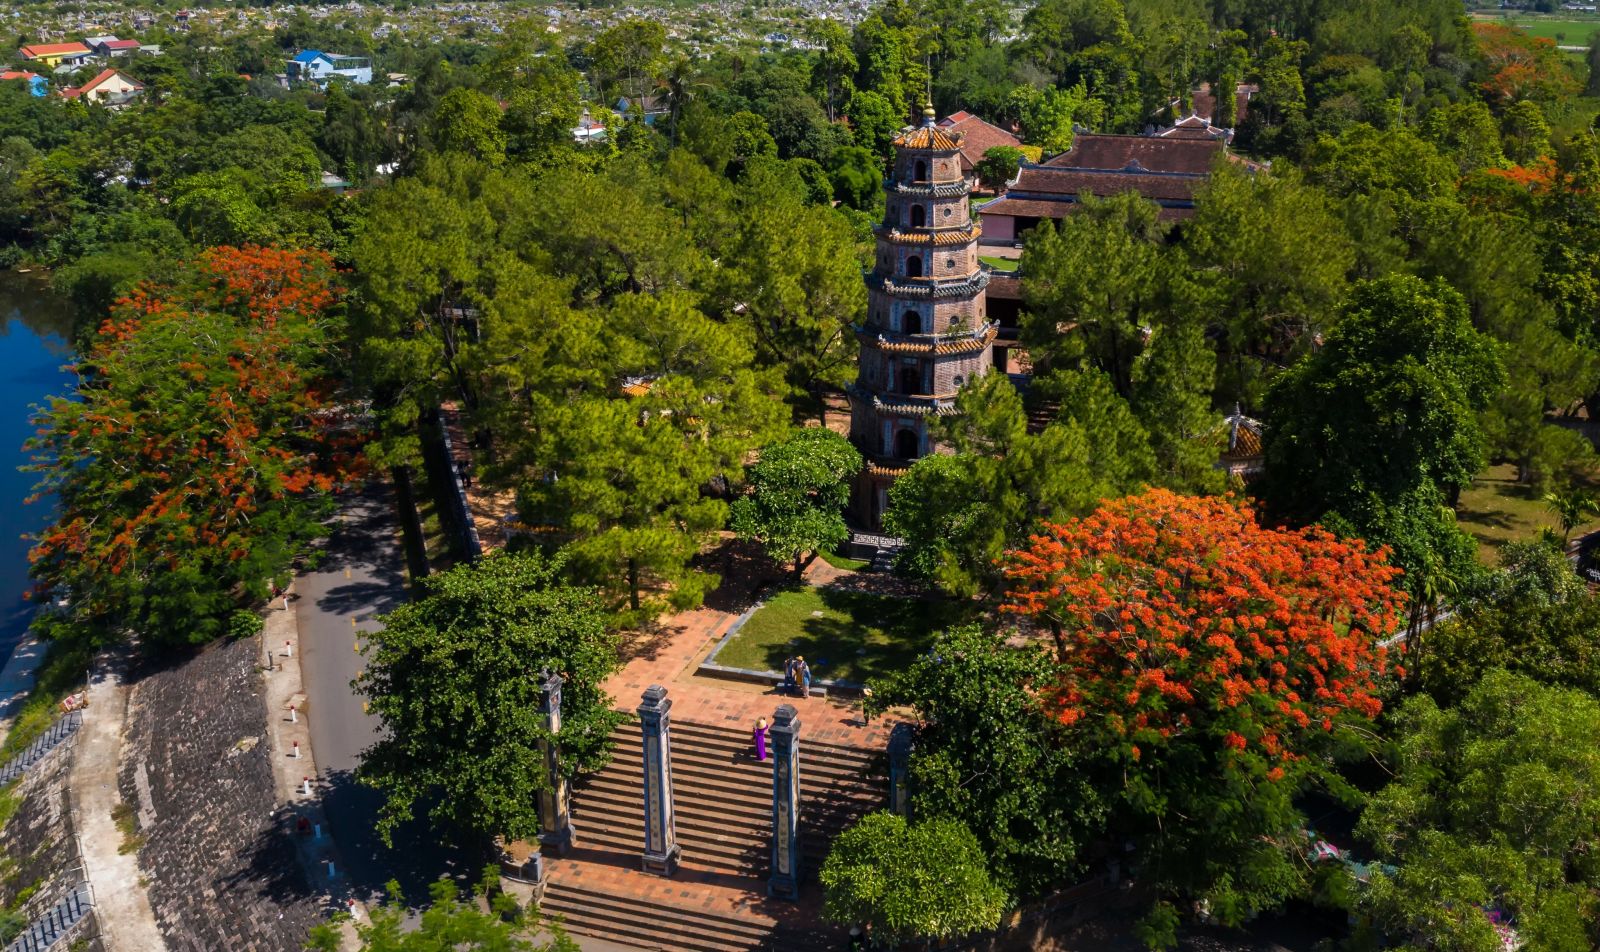 Thien Mu Pagoda is more picturesque with the red color of the flamboyant flowers